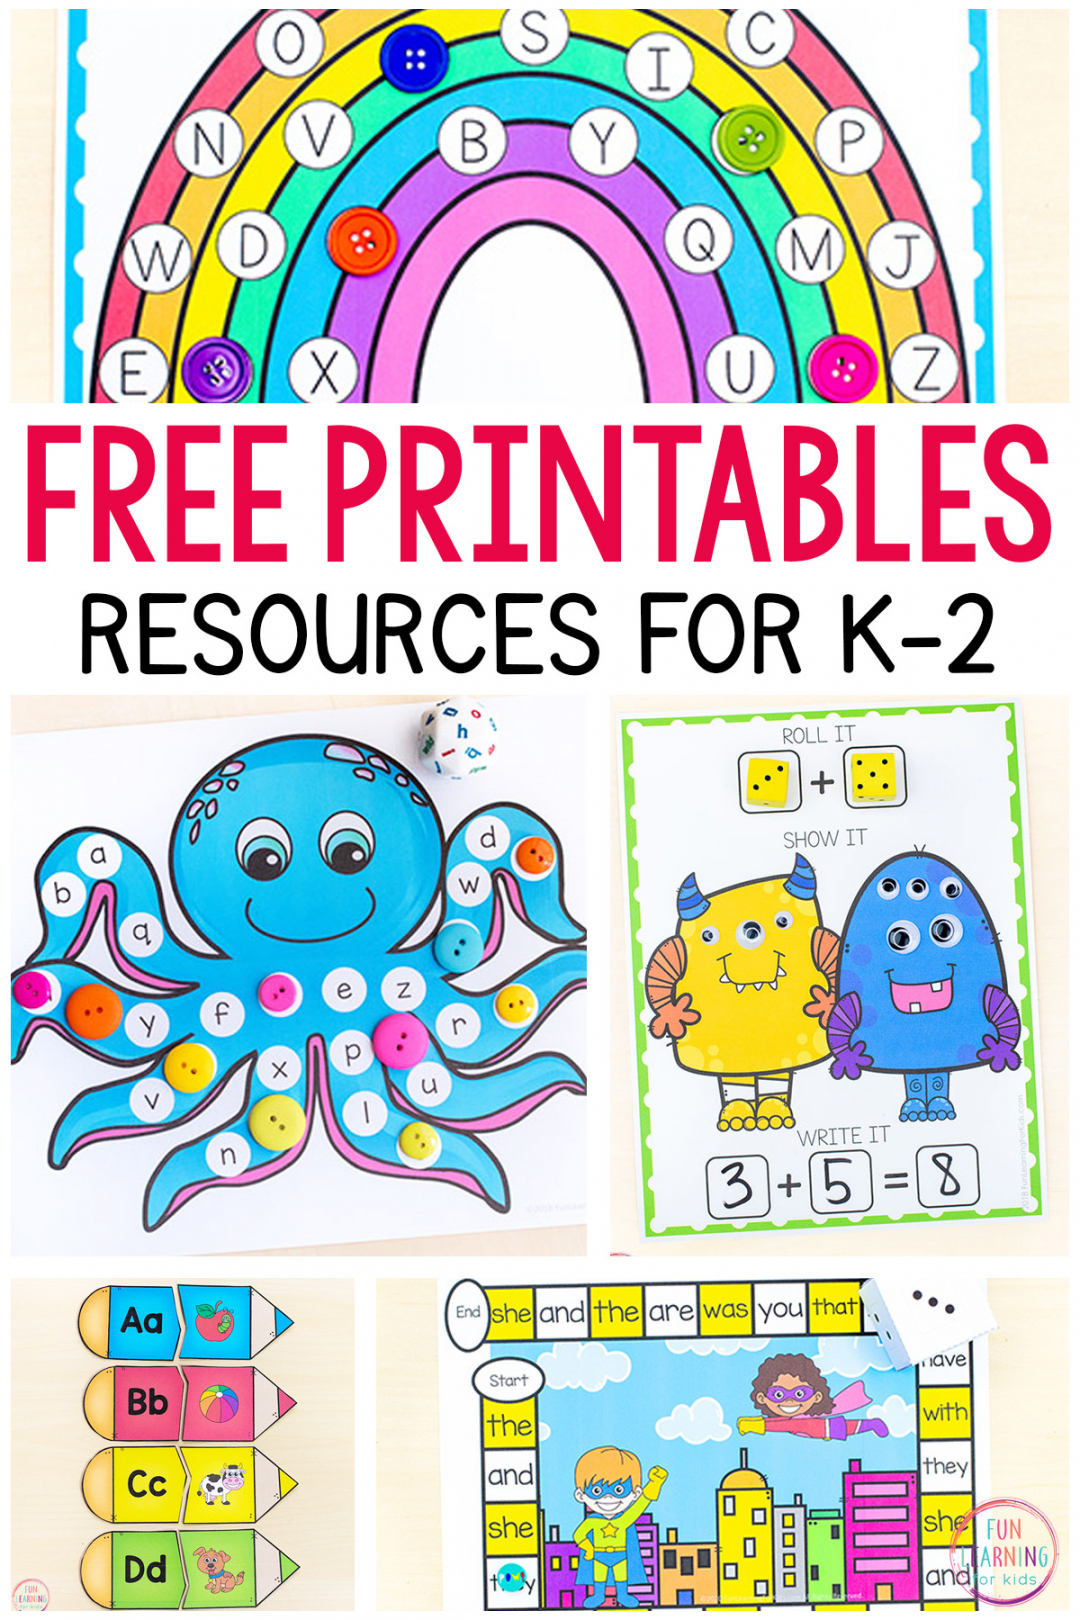 Free Printables For Preschoolers - Printable - + Free Printables and Activities for Kids